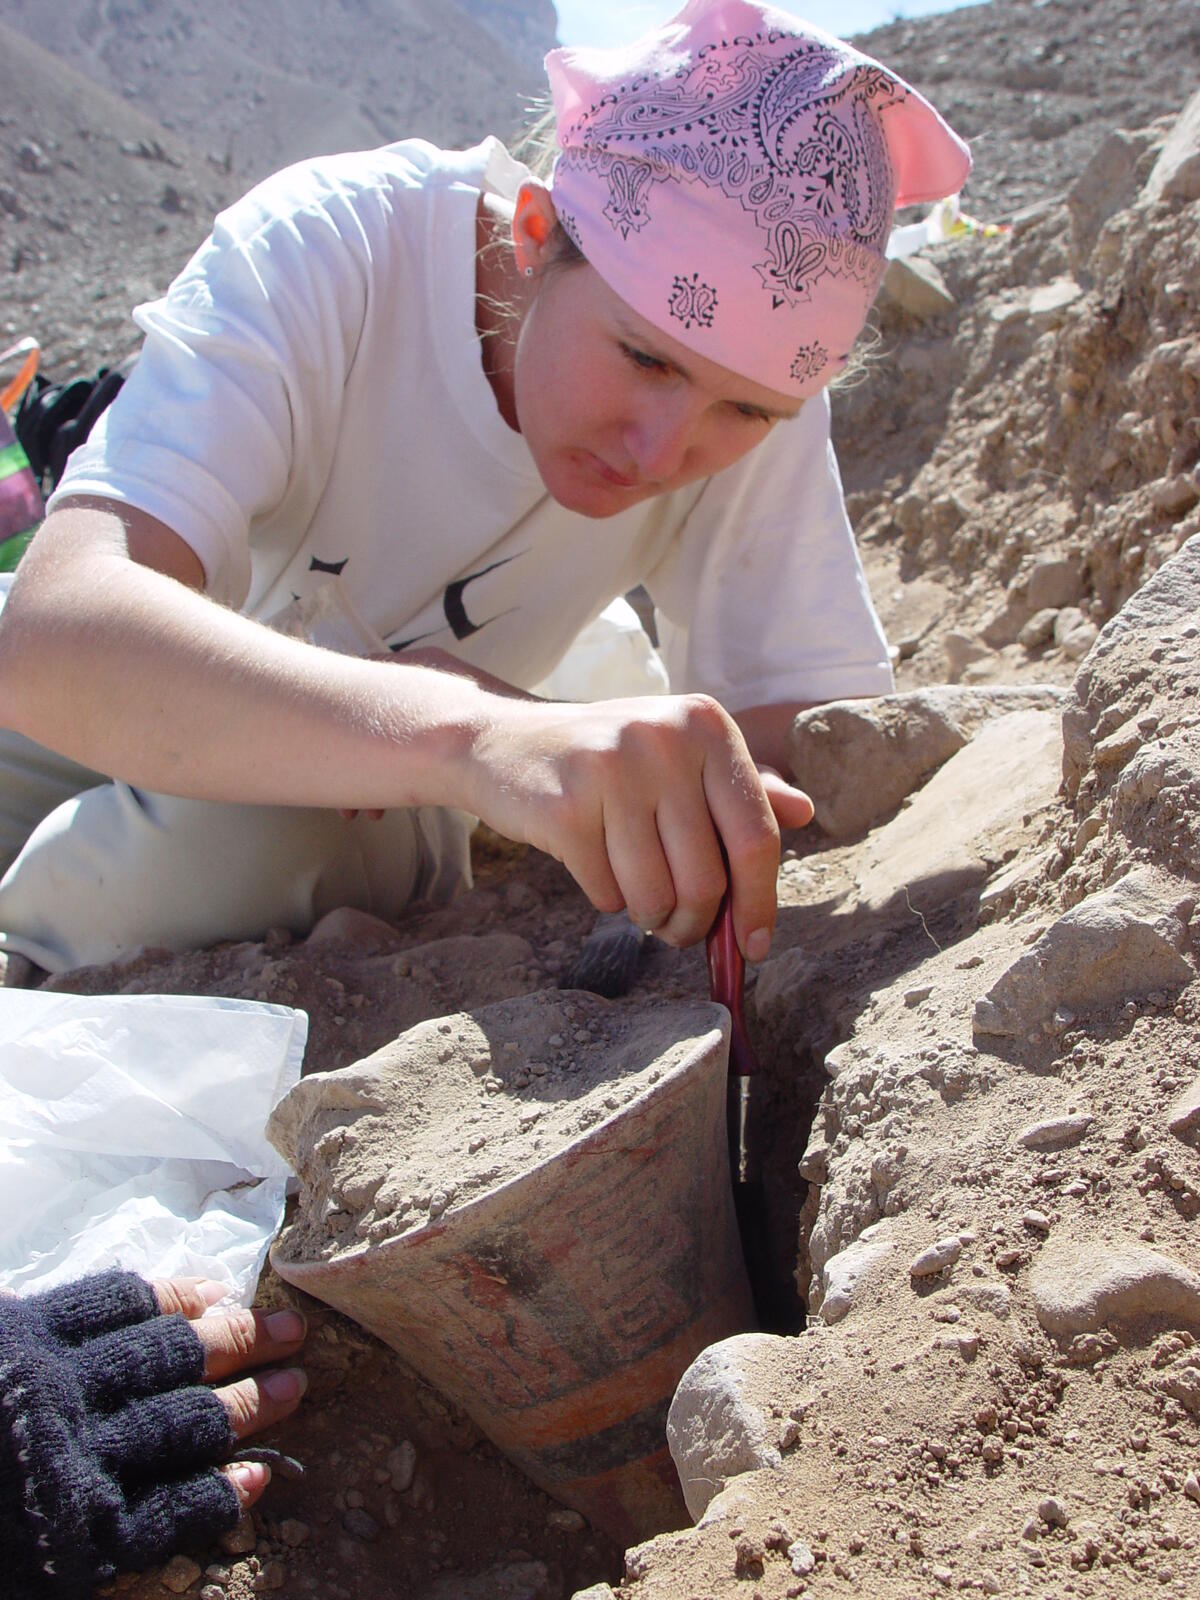 close-up of woman's face, intently looking at her work on a dig